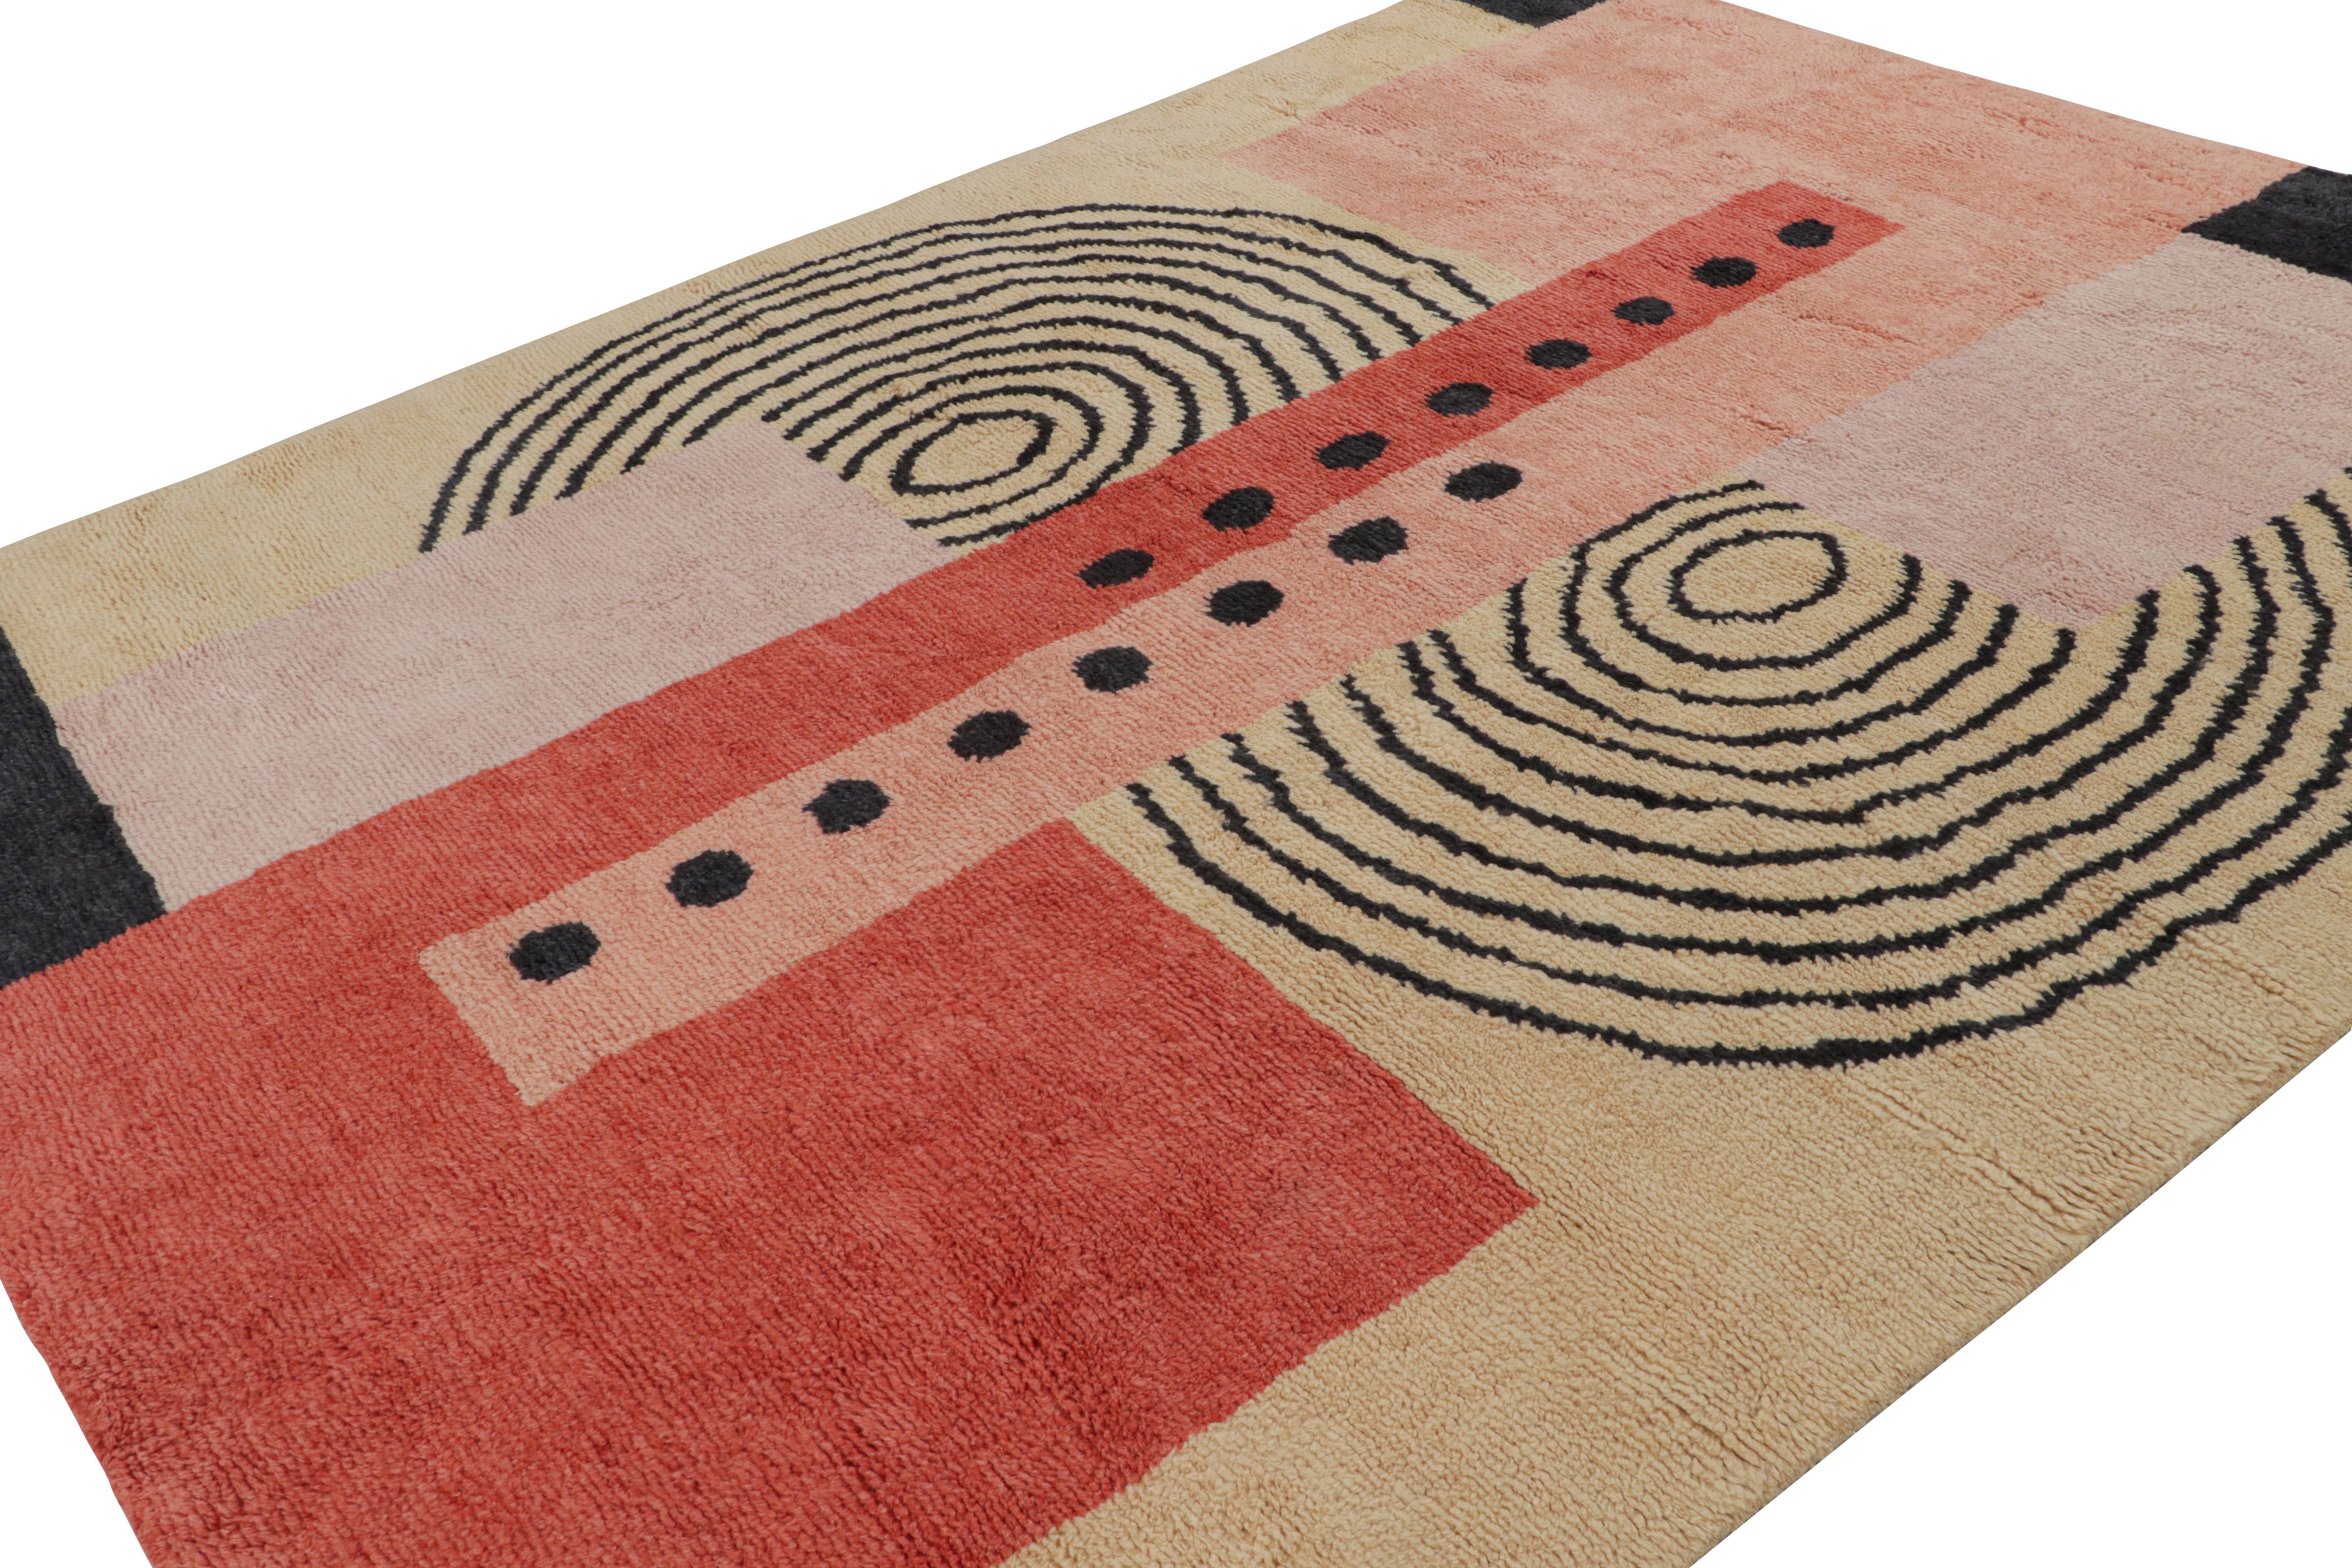 Hand-knotted in wool, this 8x10 French Art Deco rug originating from India, features pink and black geometric patterns in a play of cubist sensibilities with concentric circles. 

On the Design: 

This modern piece has been inspired by rugs and